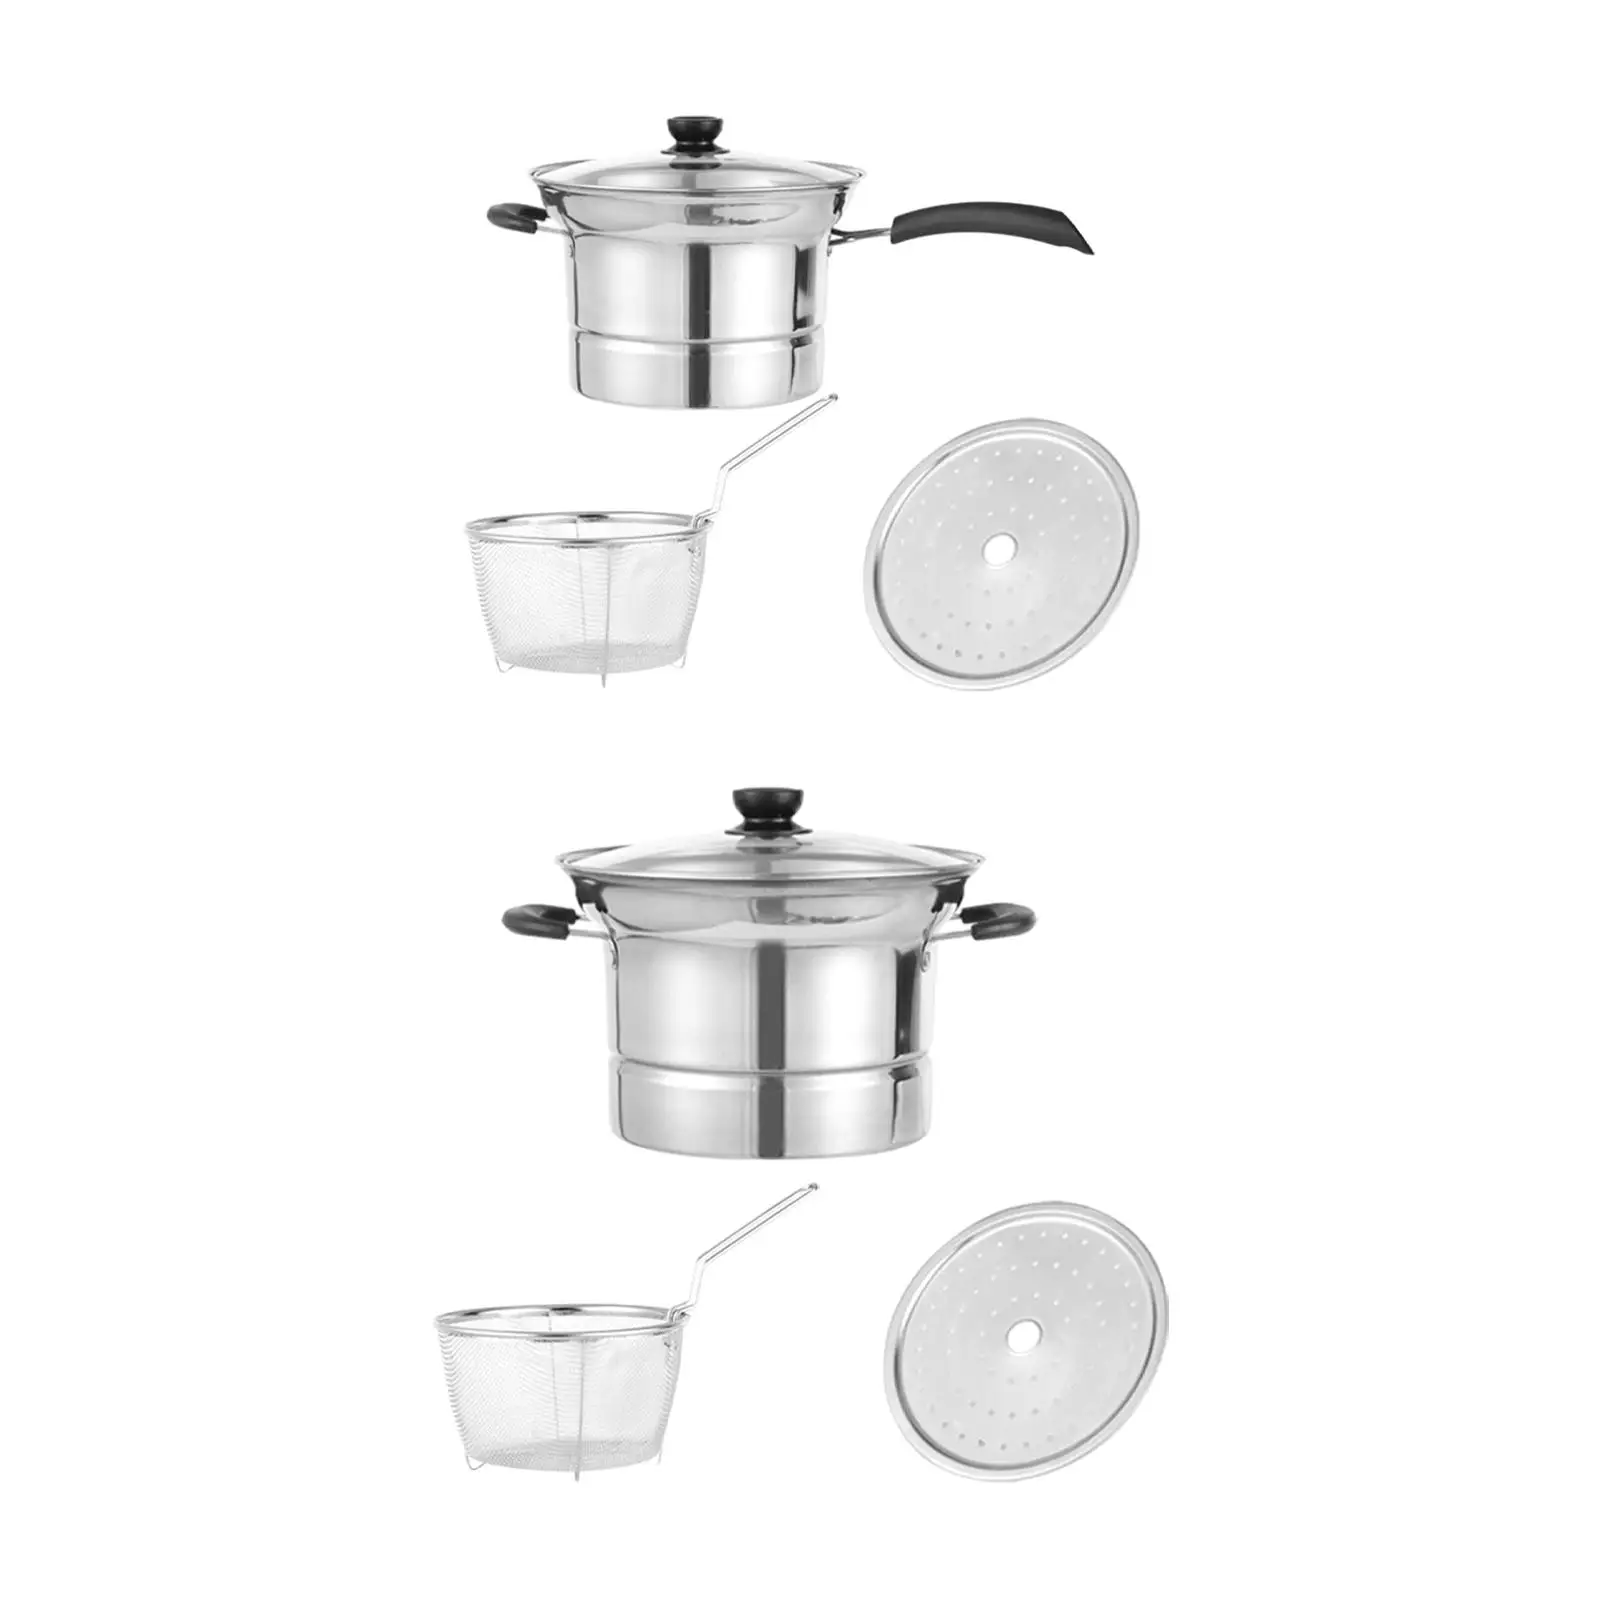 Deep Fryer Kitchenware Multifunction Pan Deep Fryer Cooking Pot with Strainer Basket for Dining Room Camping Home Kitchen Party